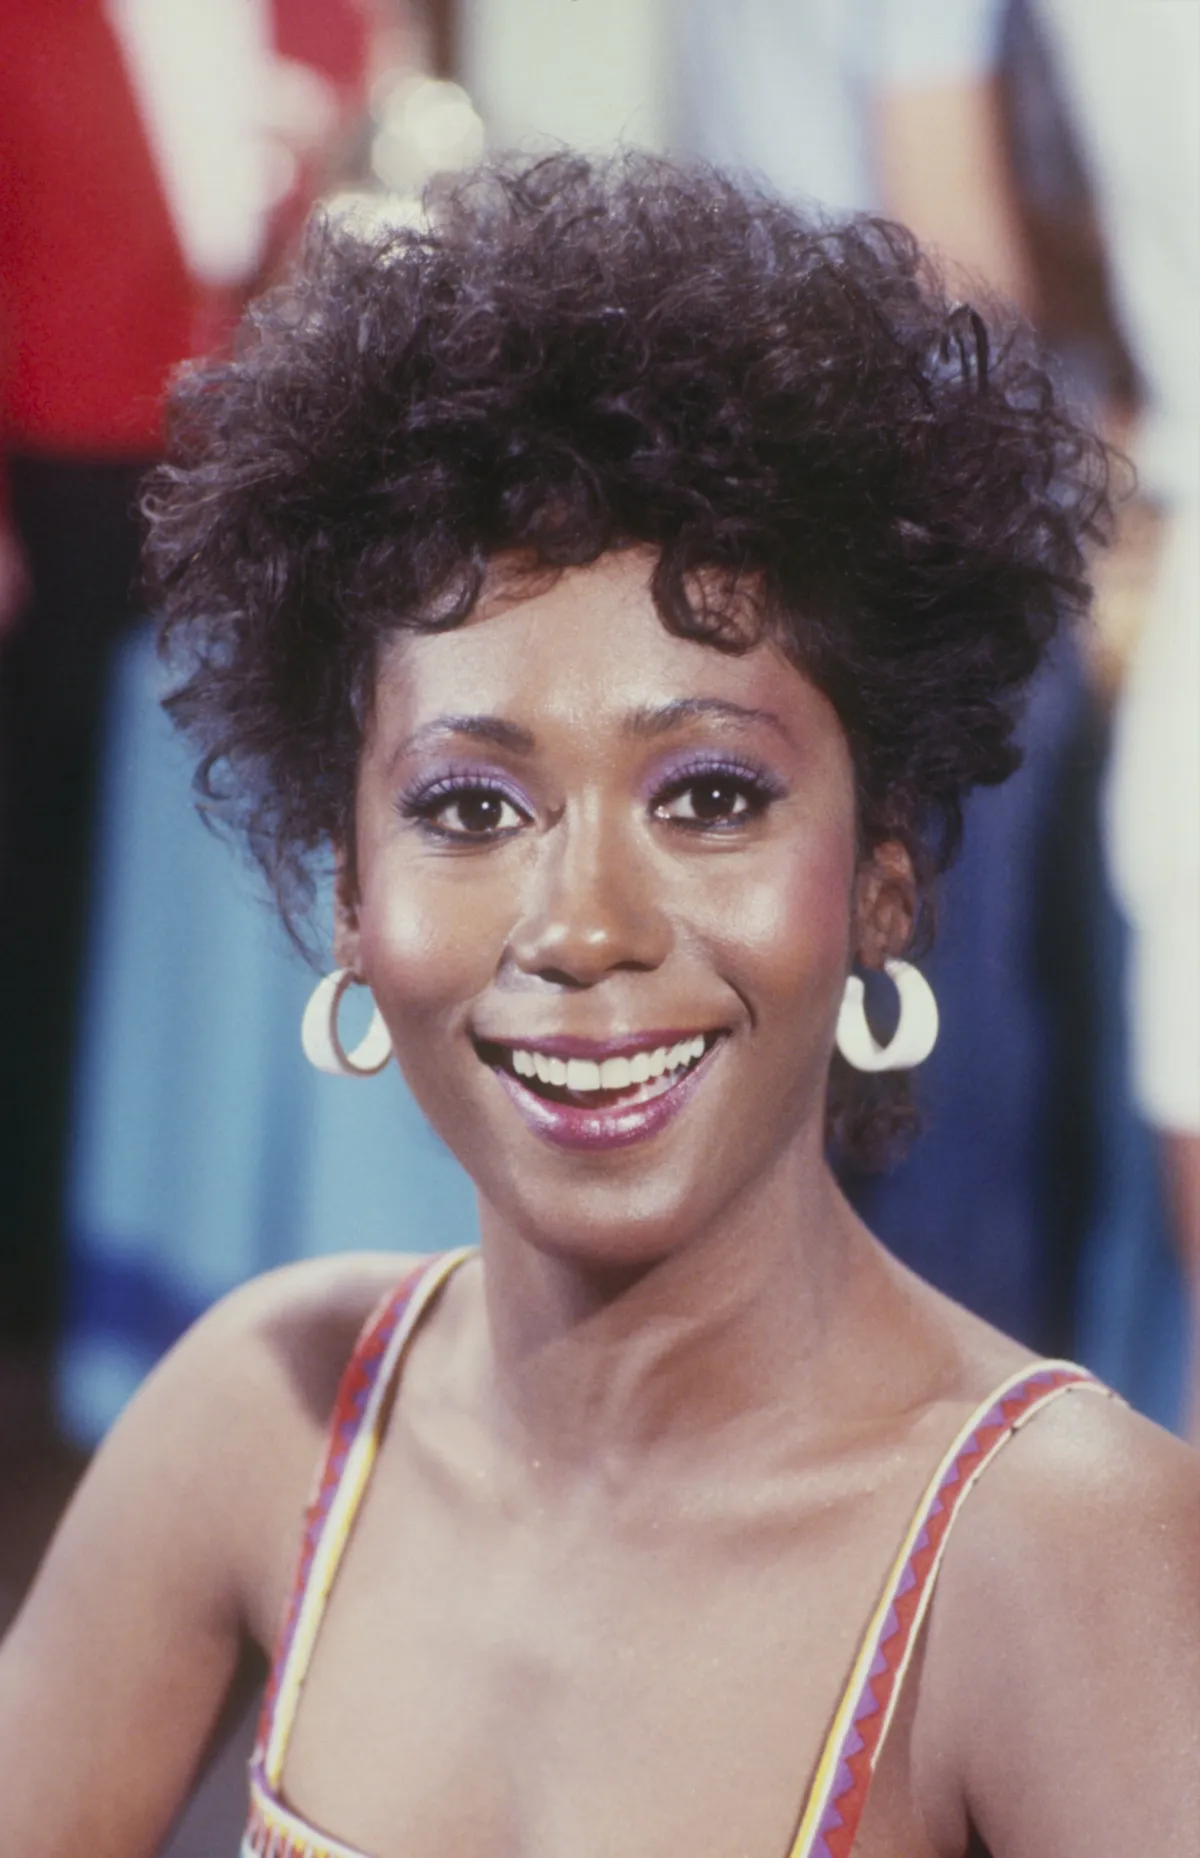 Berlinda Tolbert in an episode of "The Love Boat" which aired on January 5, 1985. | Photo: Getty Images